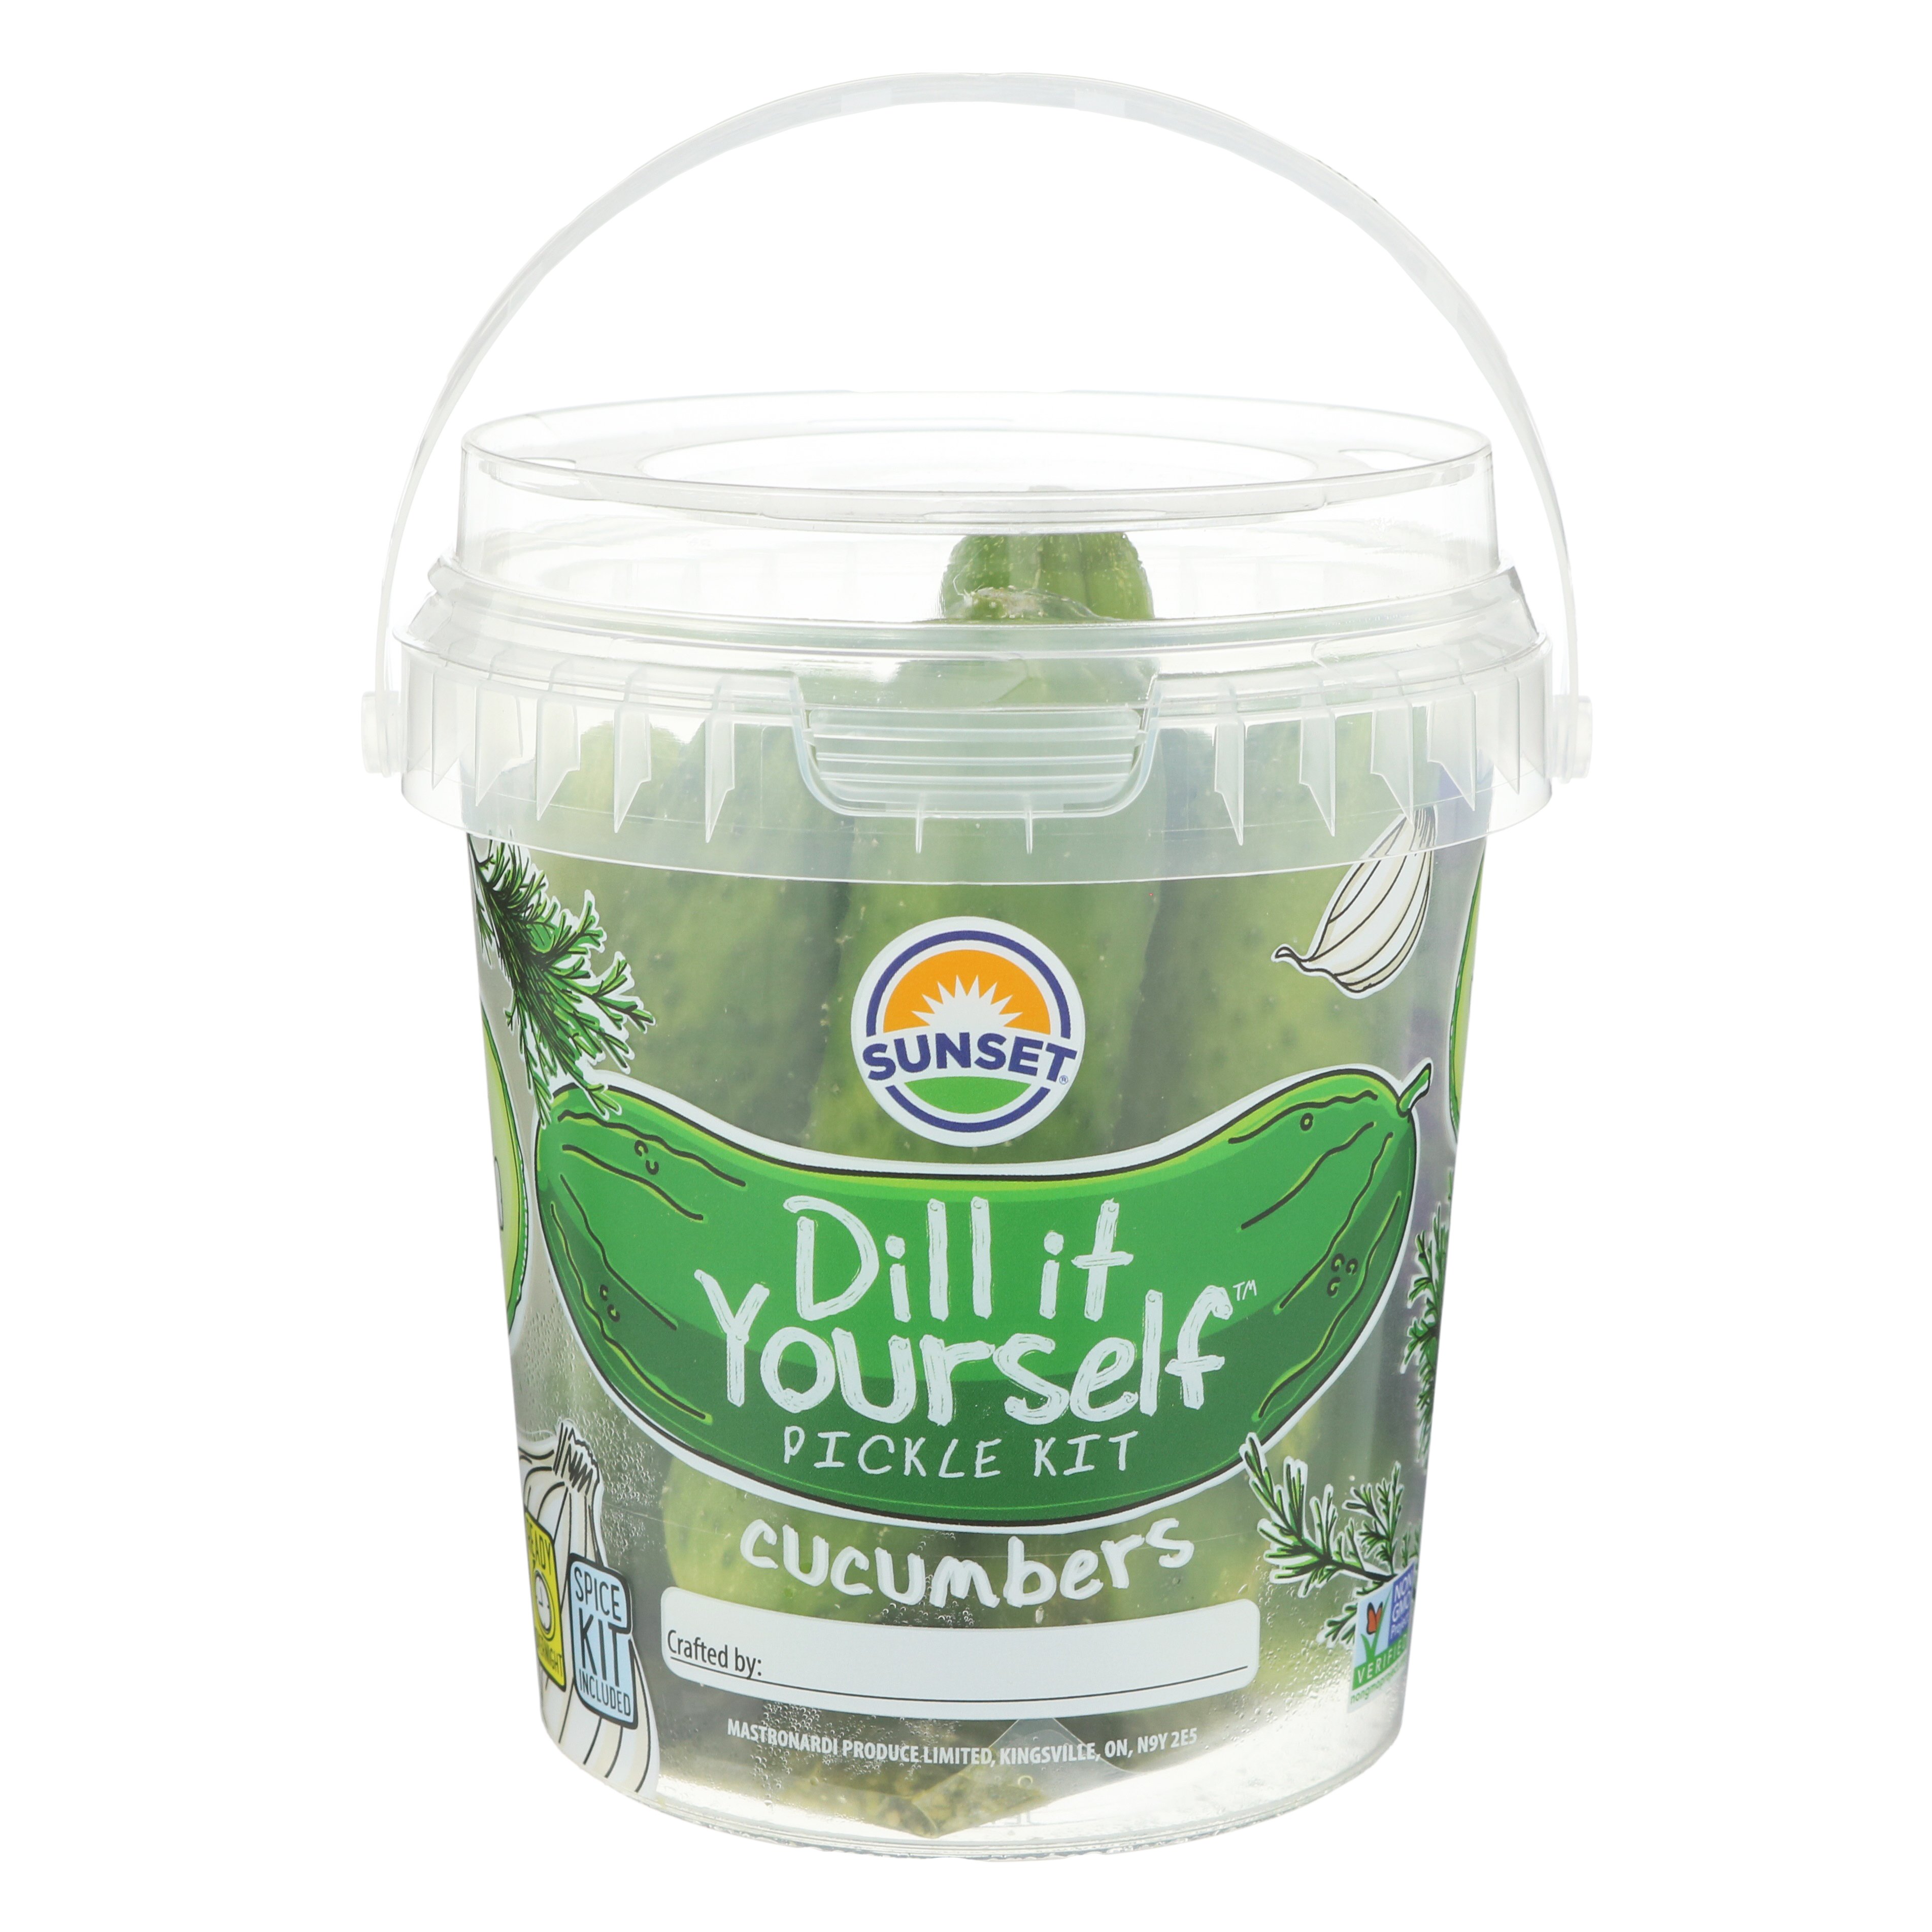 Sunset Dill It Yourself Pickle Kit - Shop Pickles & Cucumber at H-E-B